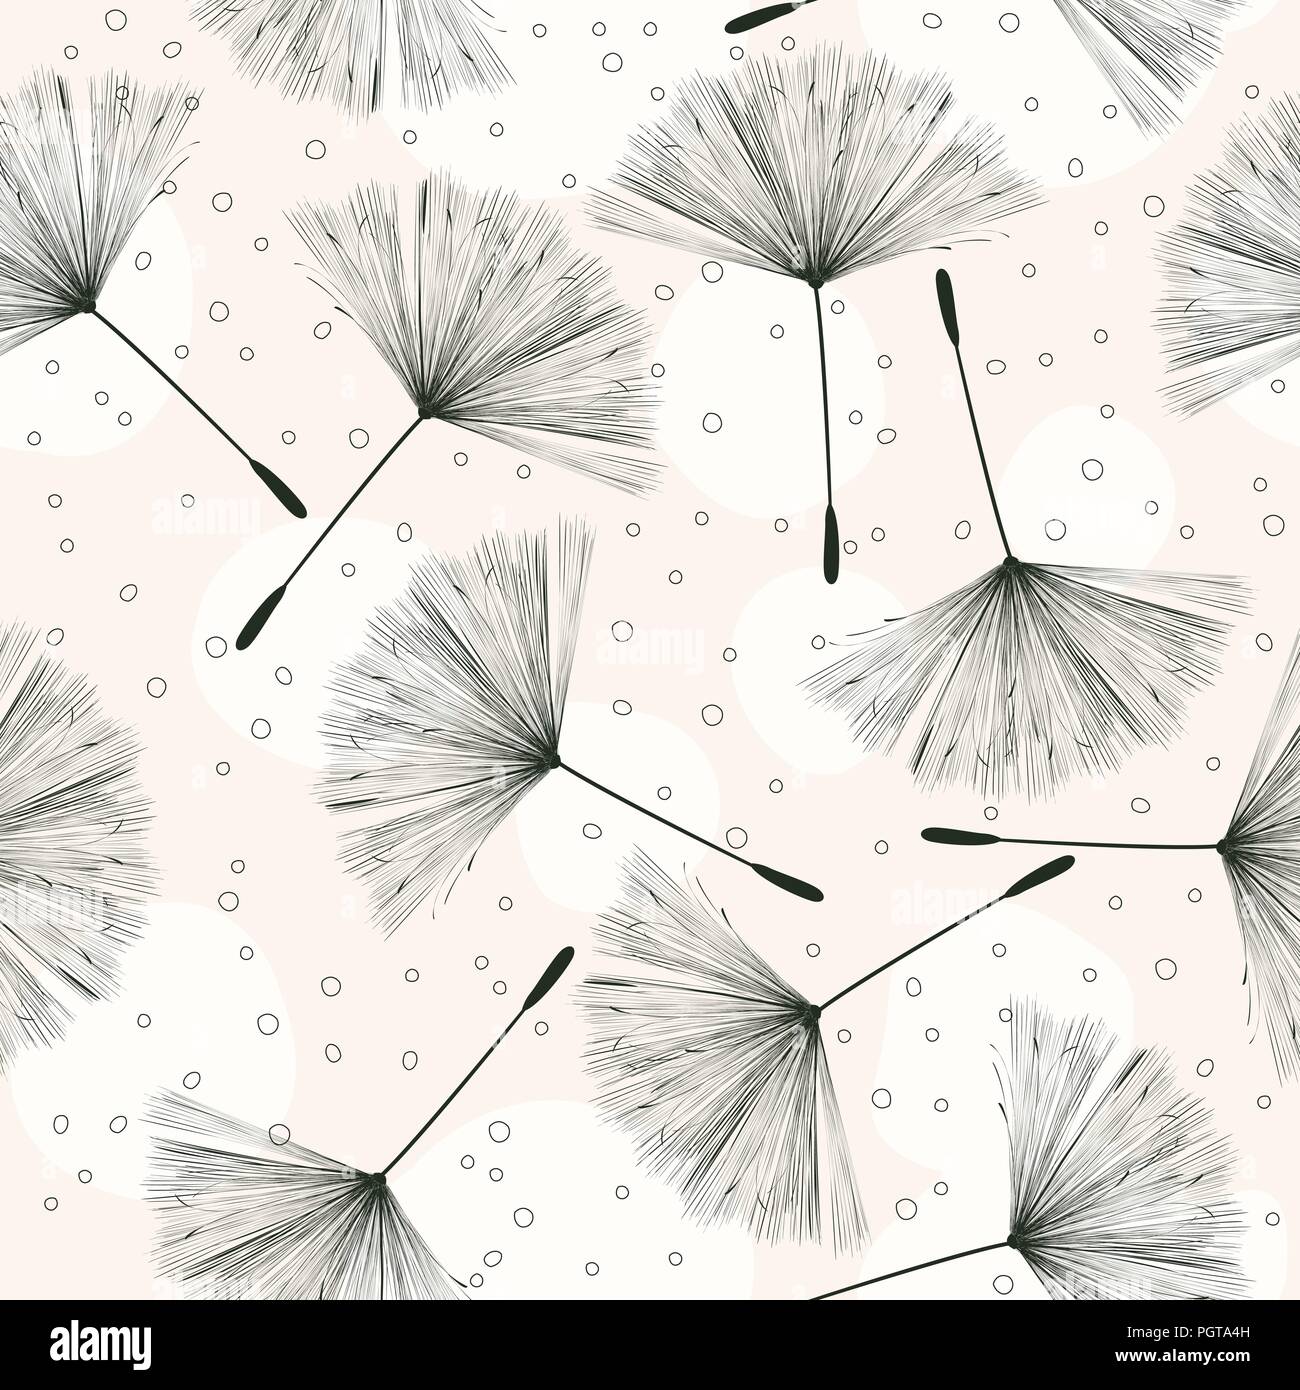 Whimsical pattern with flying dandelions on a light background Stock Vector